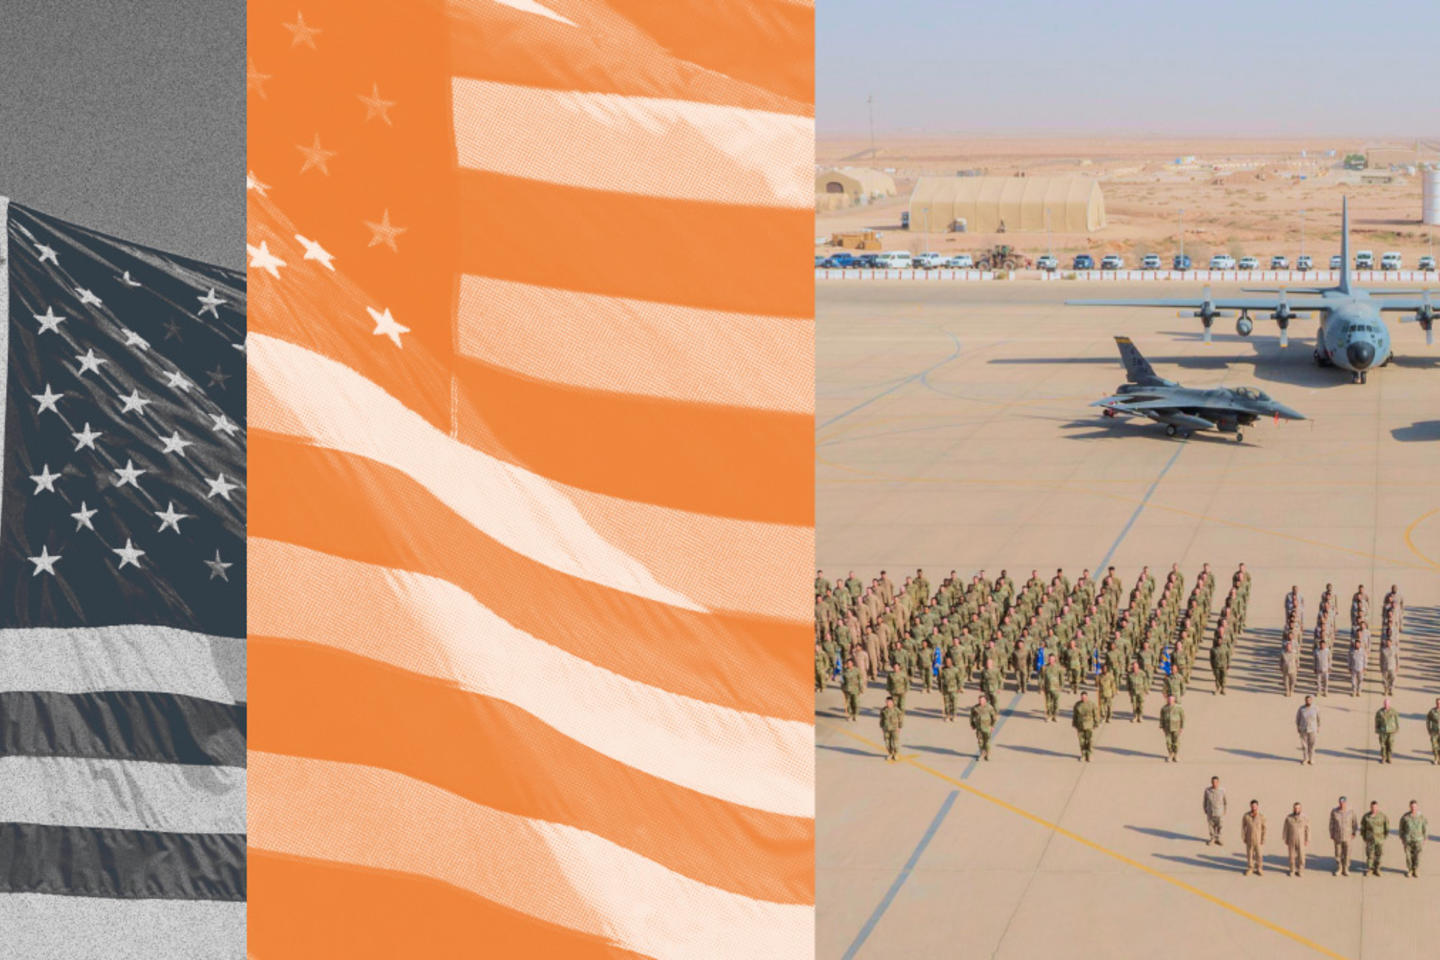 An image showing the American flag and a tarmac with soldiers